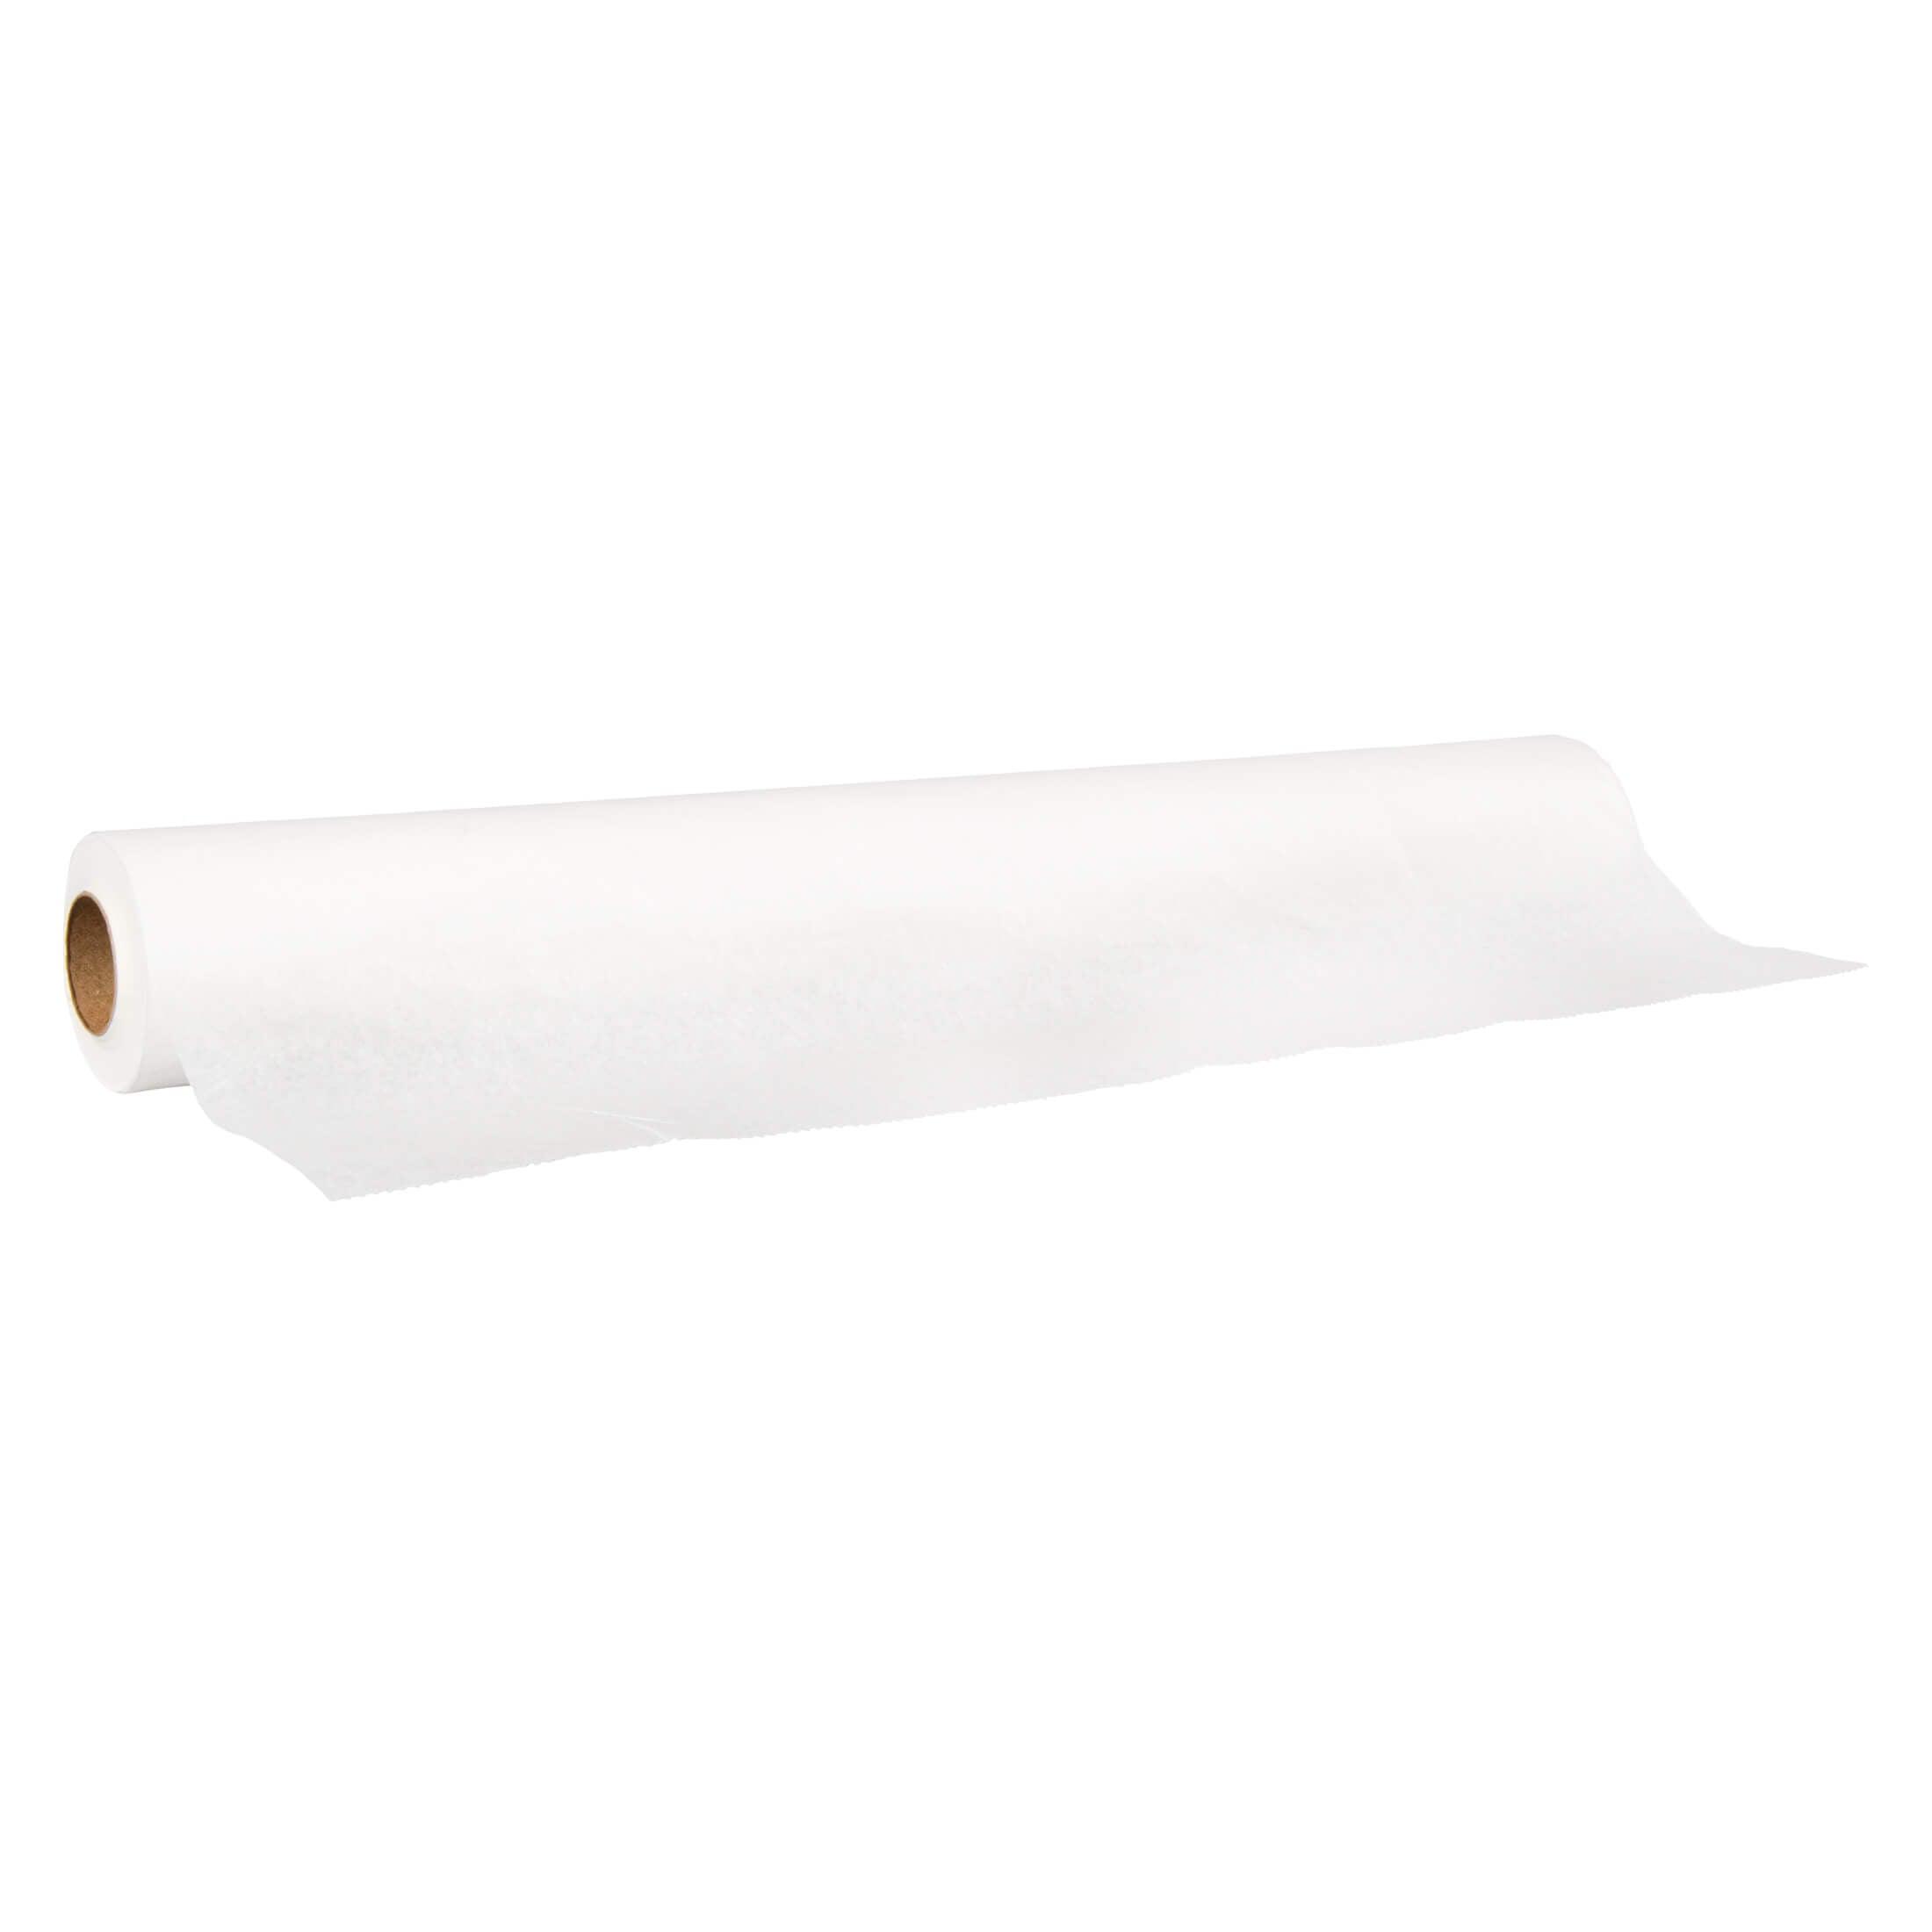 Dukal Waxing Table Paper Smooth 21” x 225' (Case of 12 Rolls)